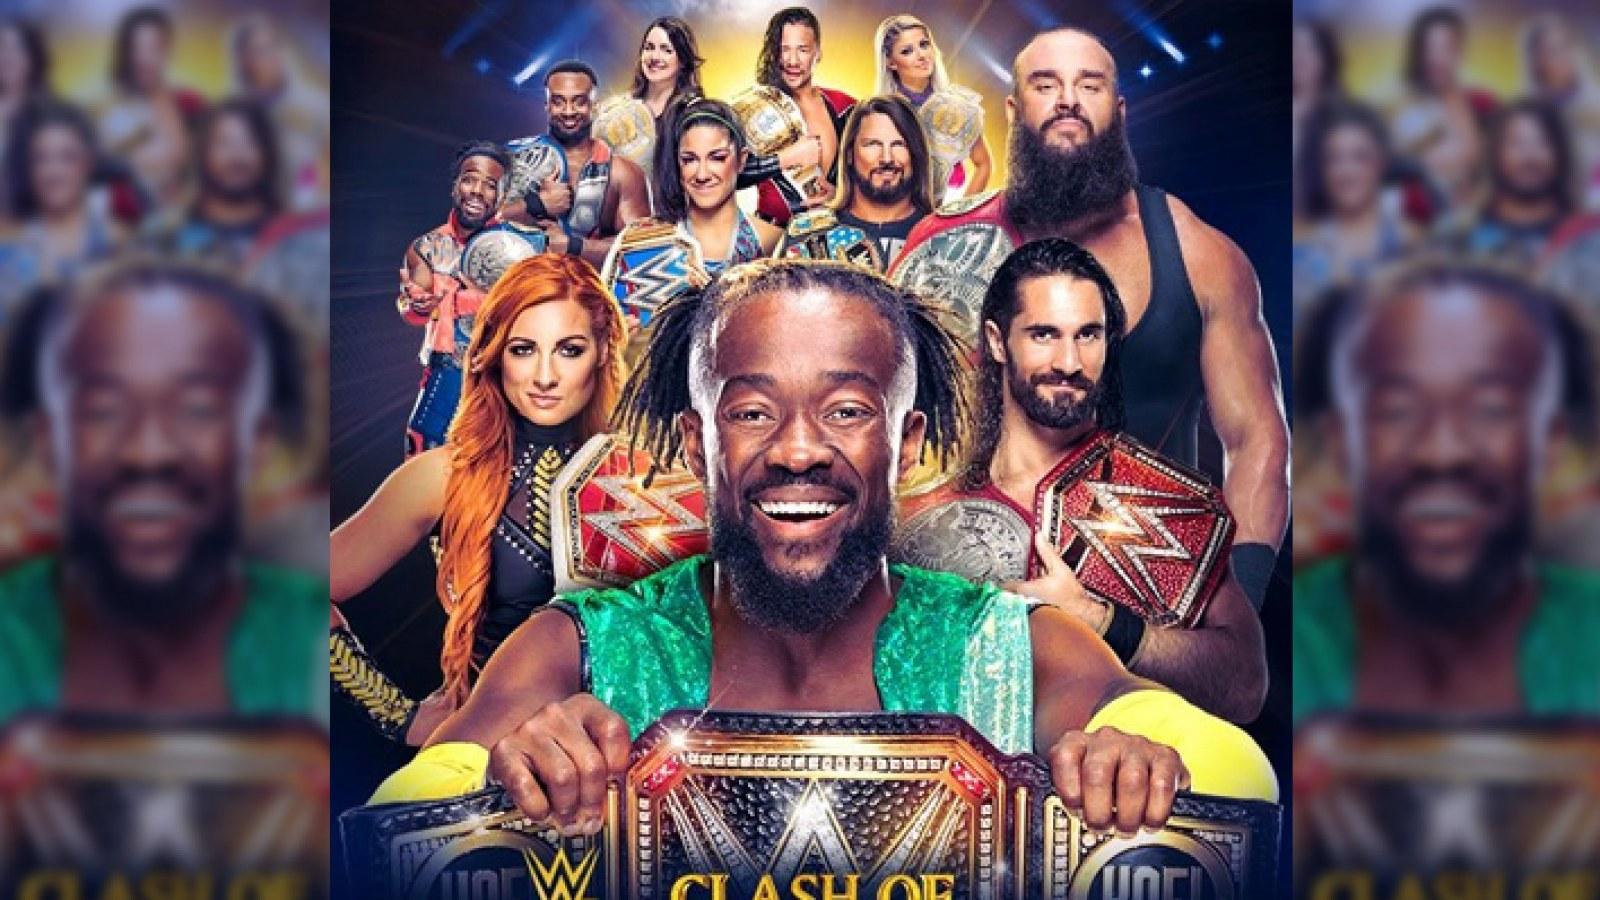 WWE Clash of Champions 2019: Start Time and How to Watch Online